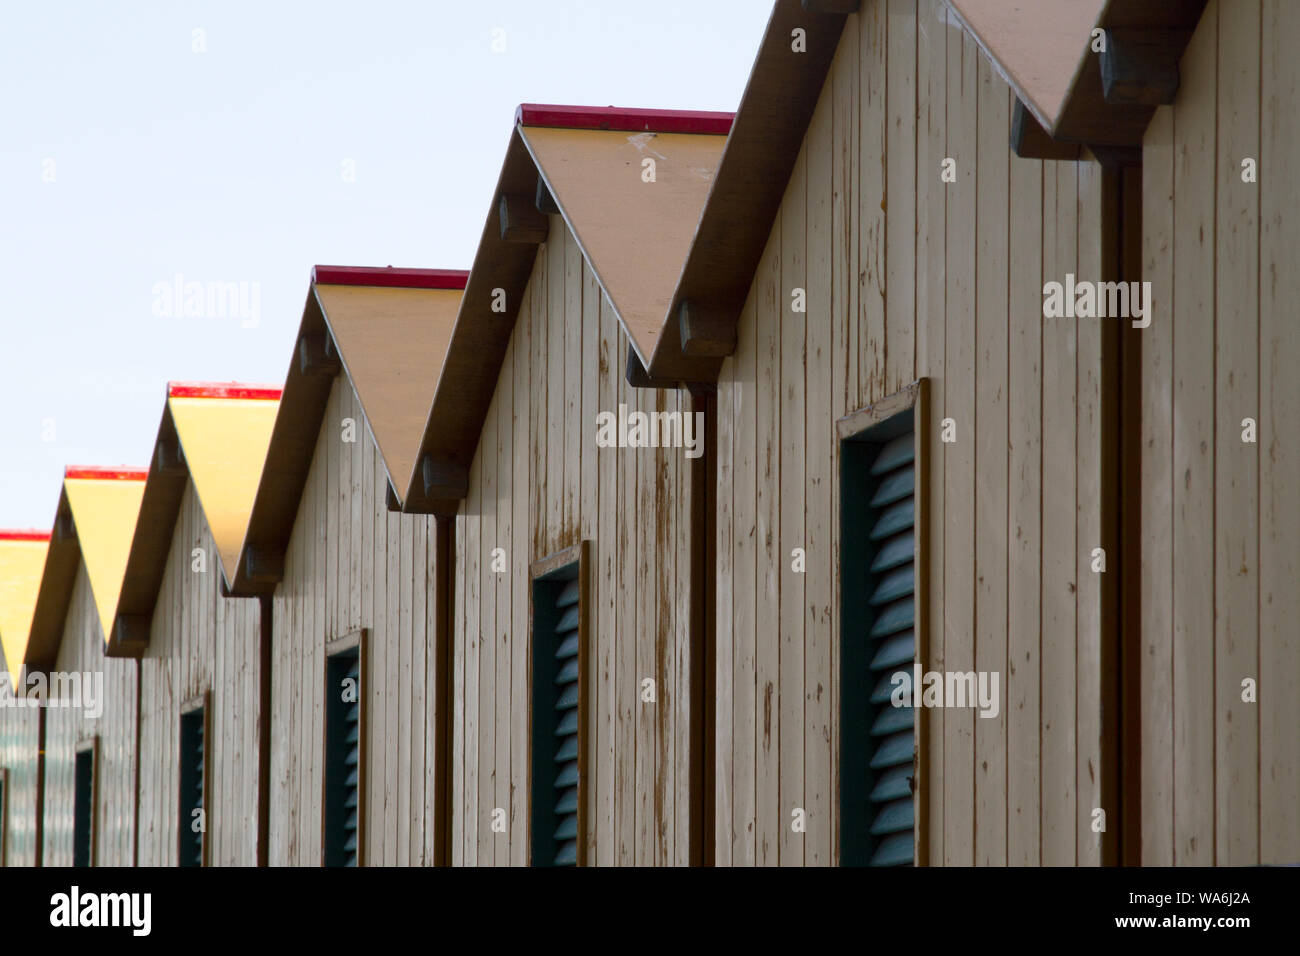 Close up view of a collection of beach huts in Sorrento, Italy Stock Photo